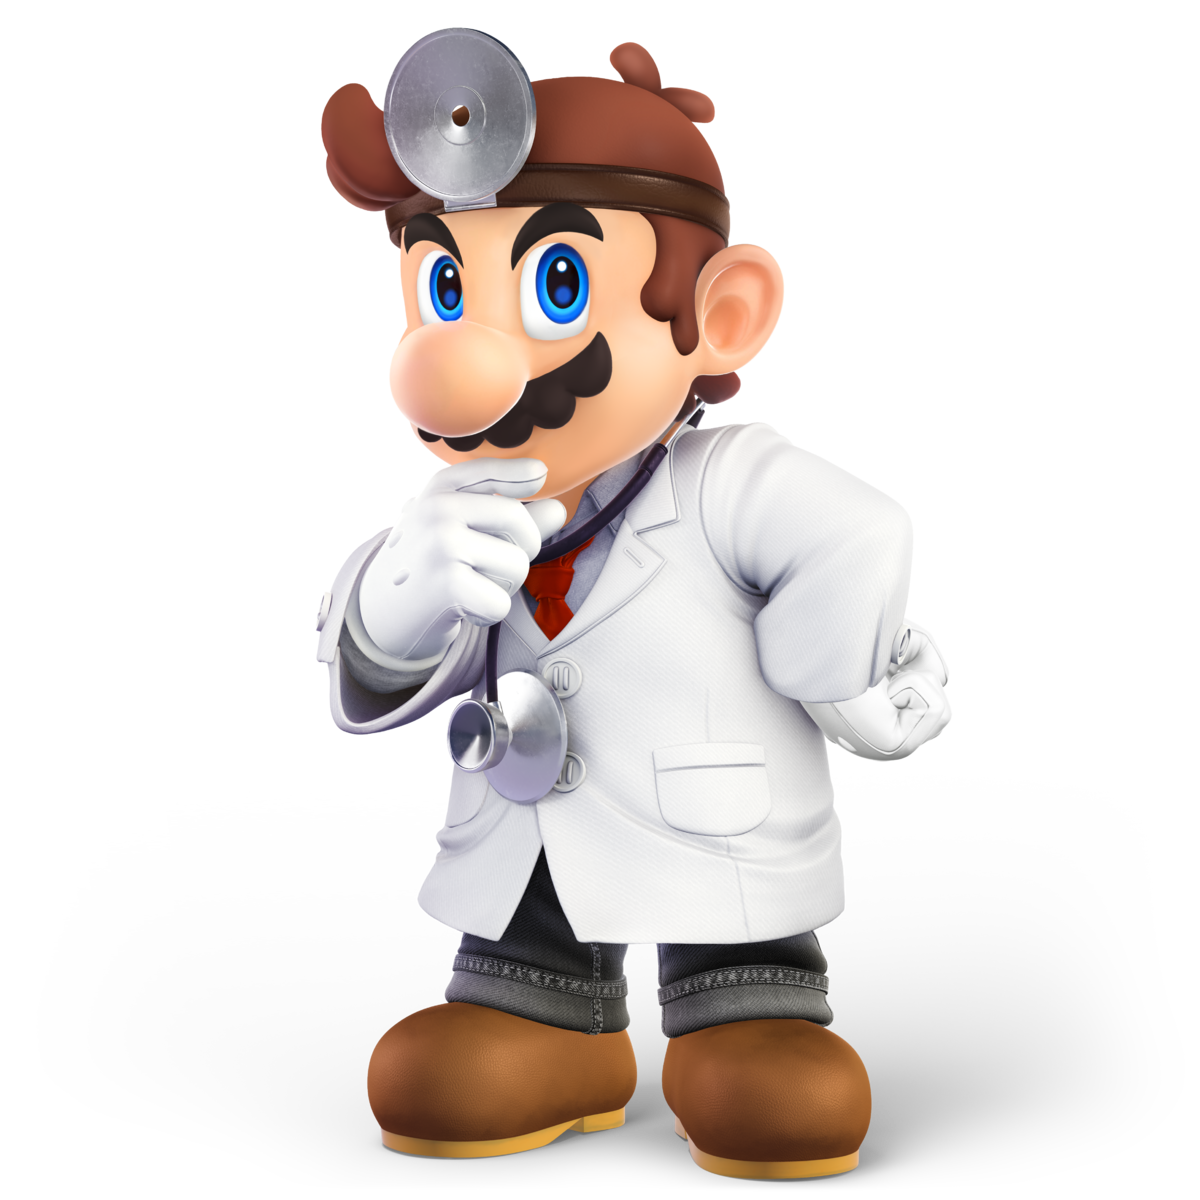 Details about  / amiibo Dr Mario Smash Brothers Doctor Mario New From Japan